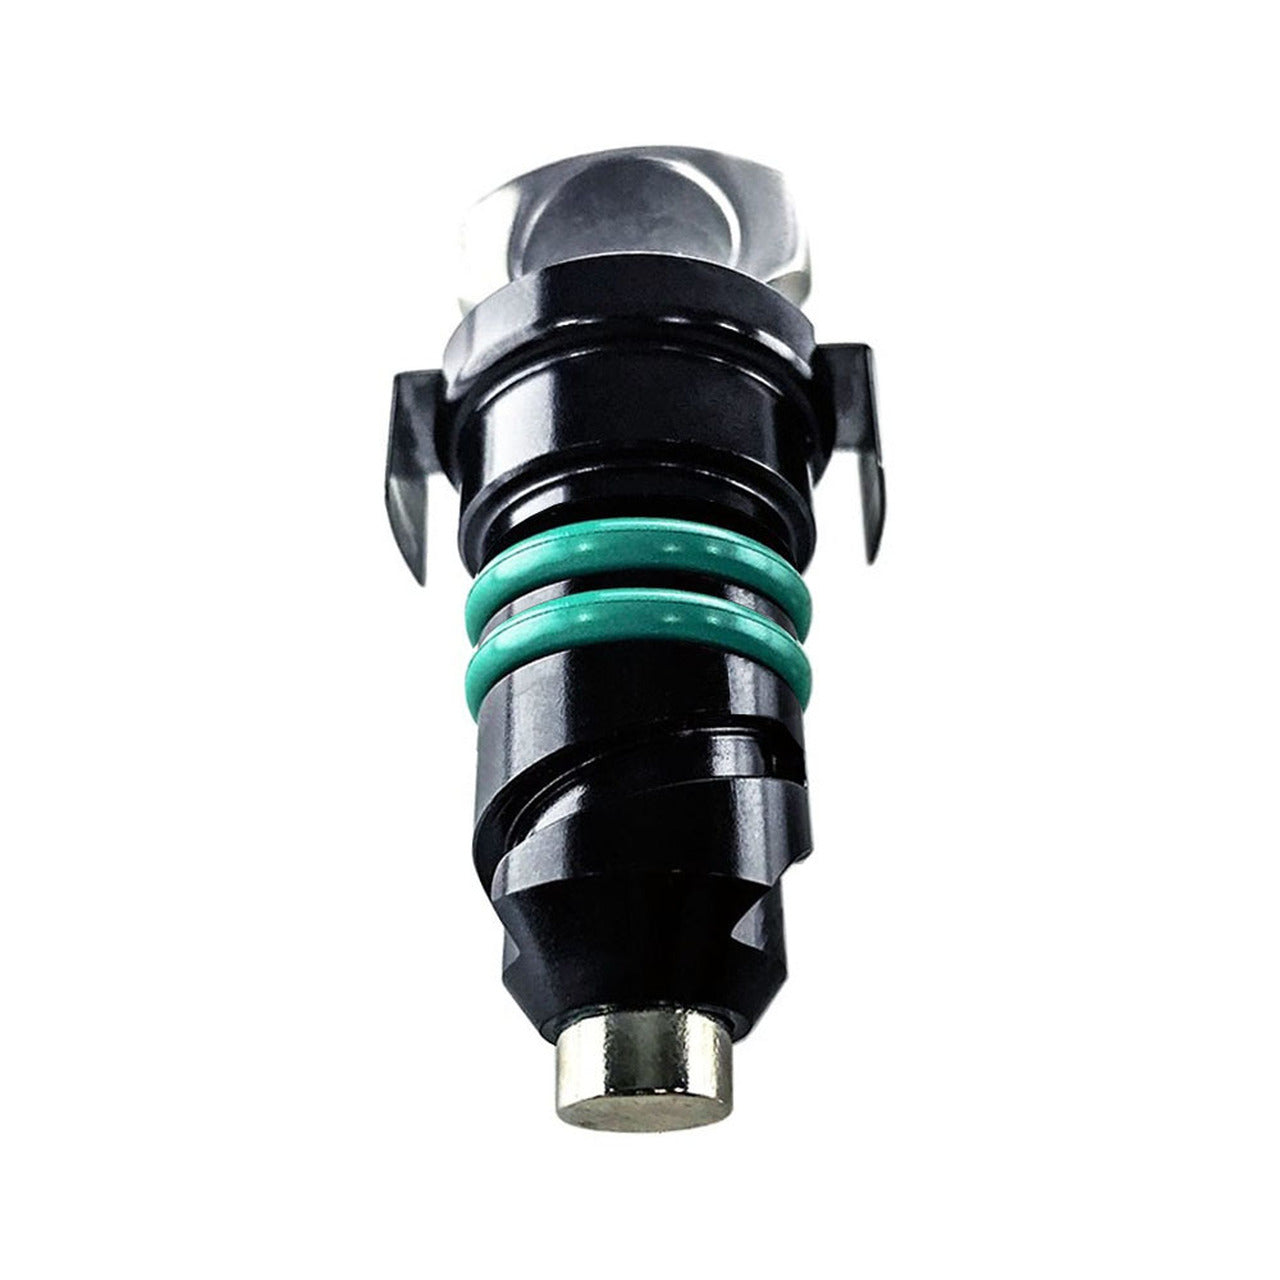 UPR Oil Sump Drain Plug for Mustang 5.0L GT 2018-22 | #3025-01 - Available from NEMESISUK.COM